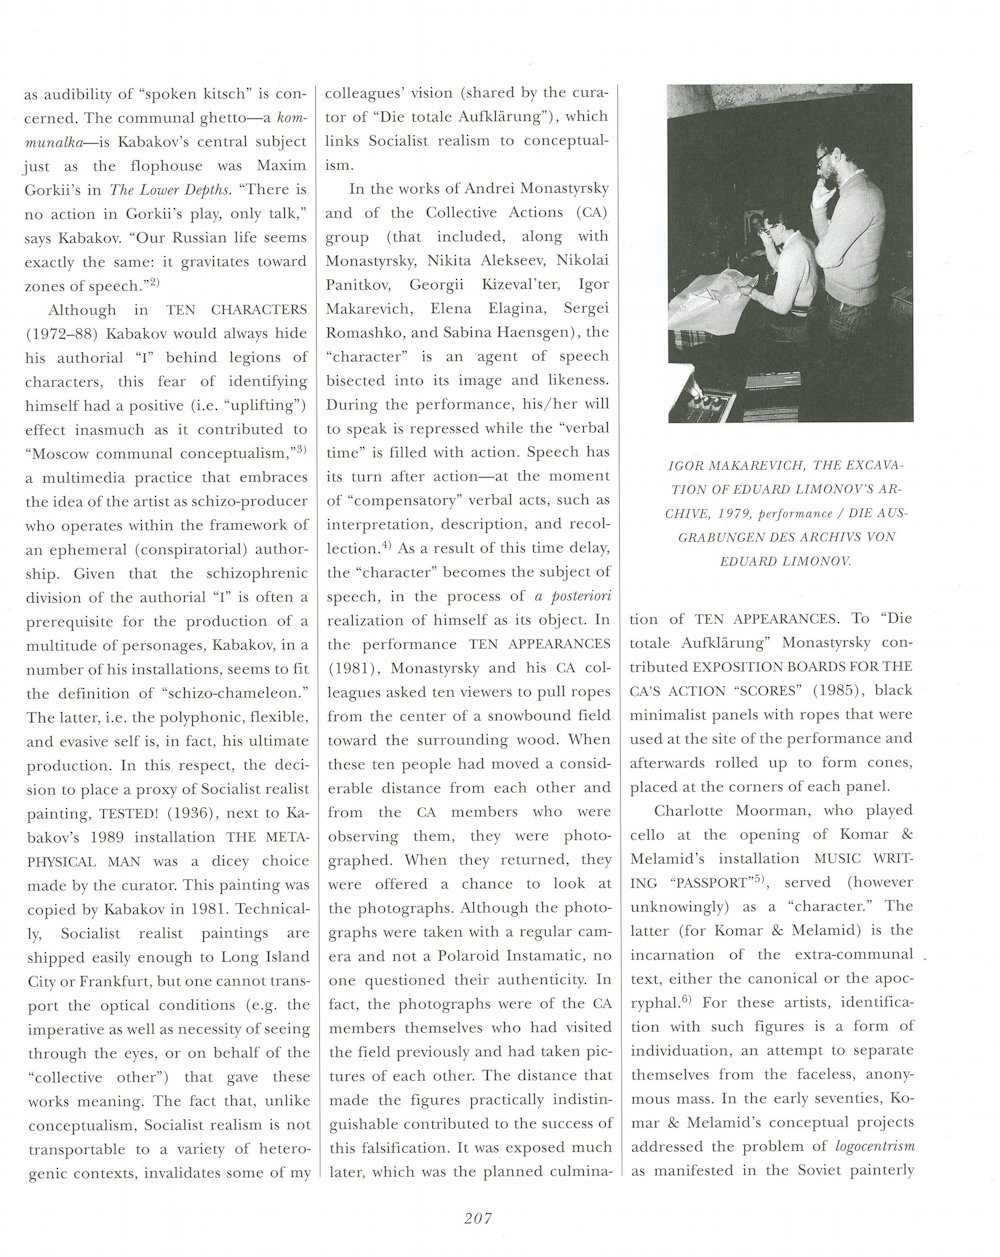 Margarita Tupitsyn. About Early Soviet Conceptualism. Page 1